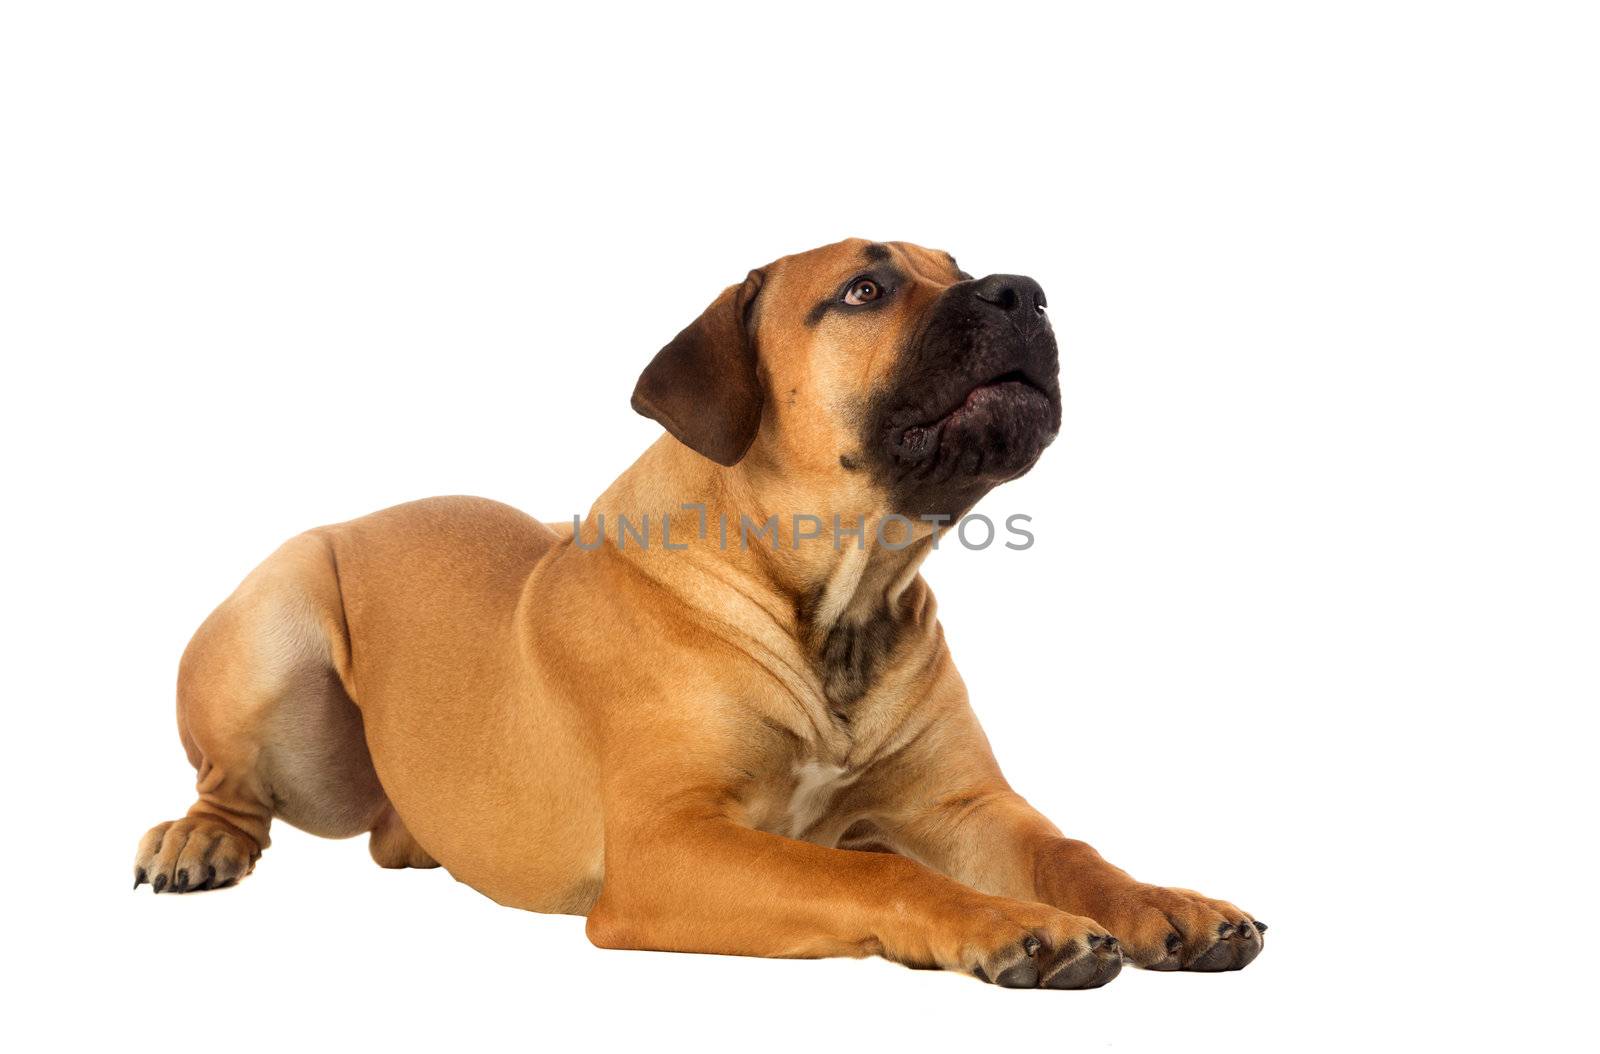 Rare breed South African boerboe puppyl posing in studio. Isolated on white